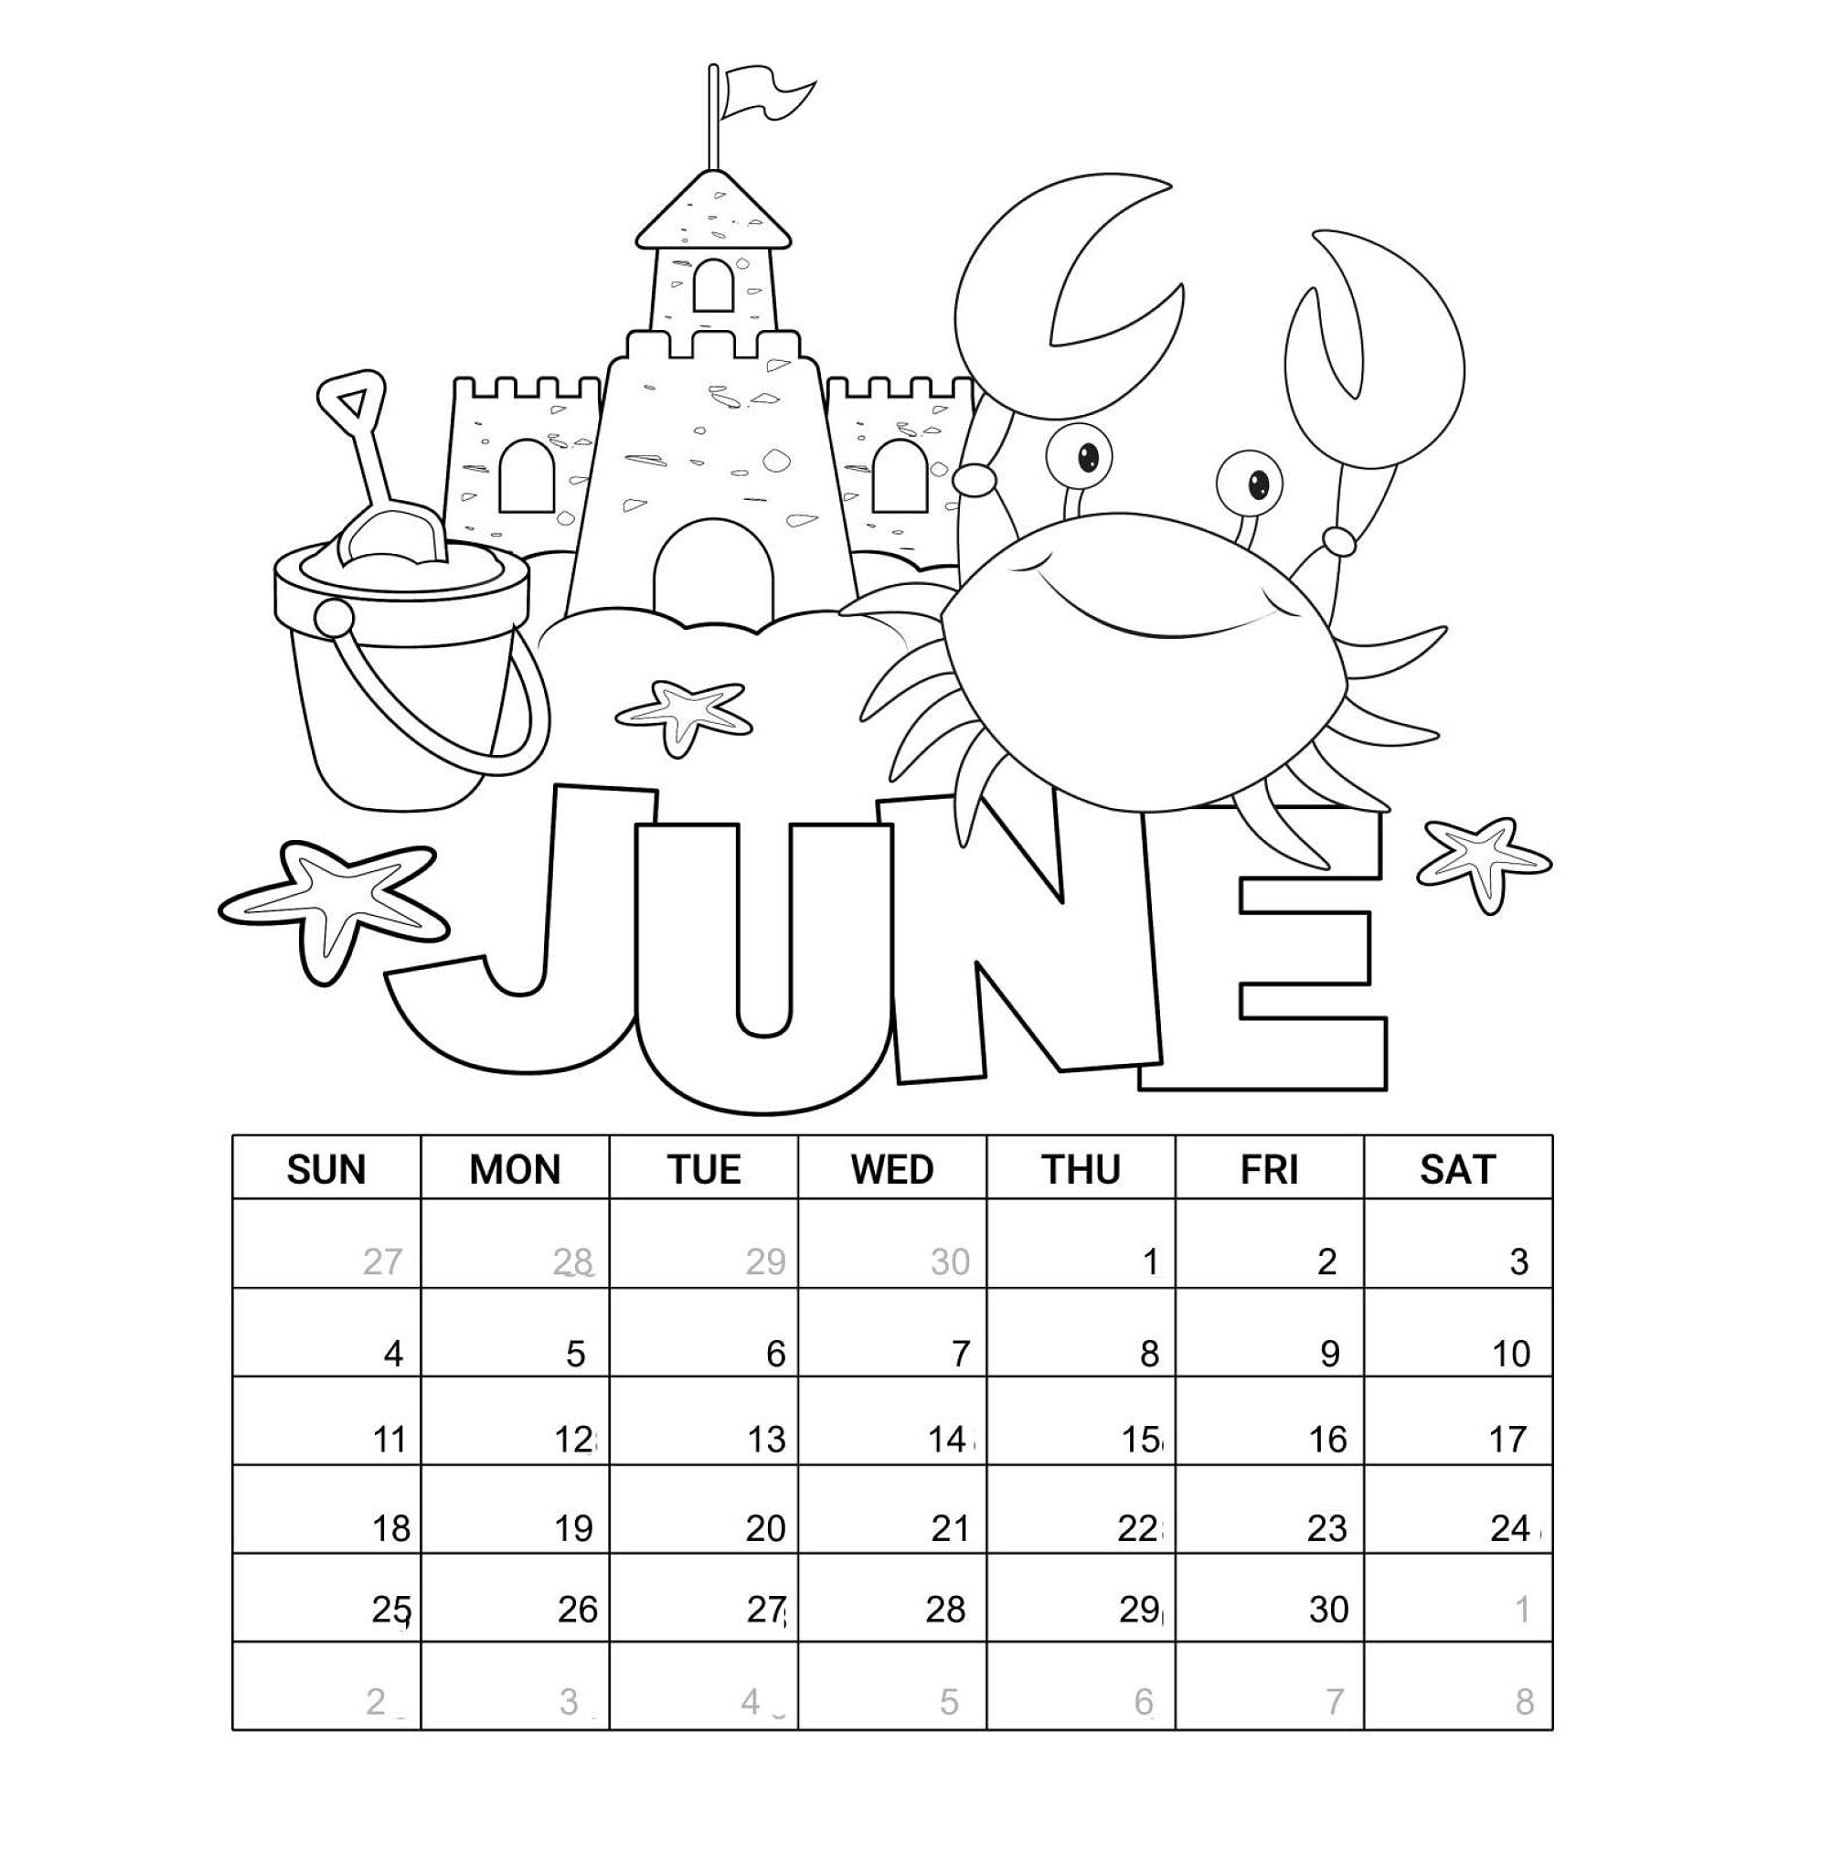 Printable coloring calendar for kids month coloring calendar for kidsinstant download printable download now